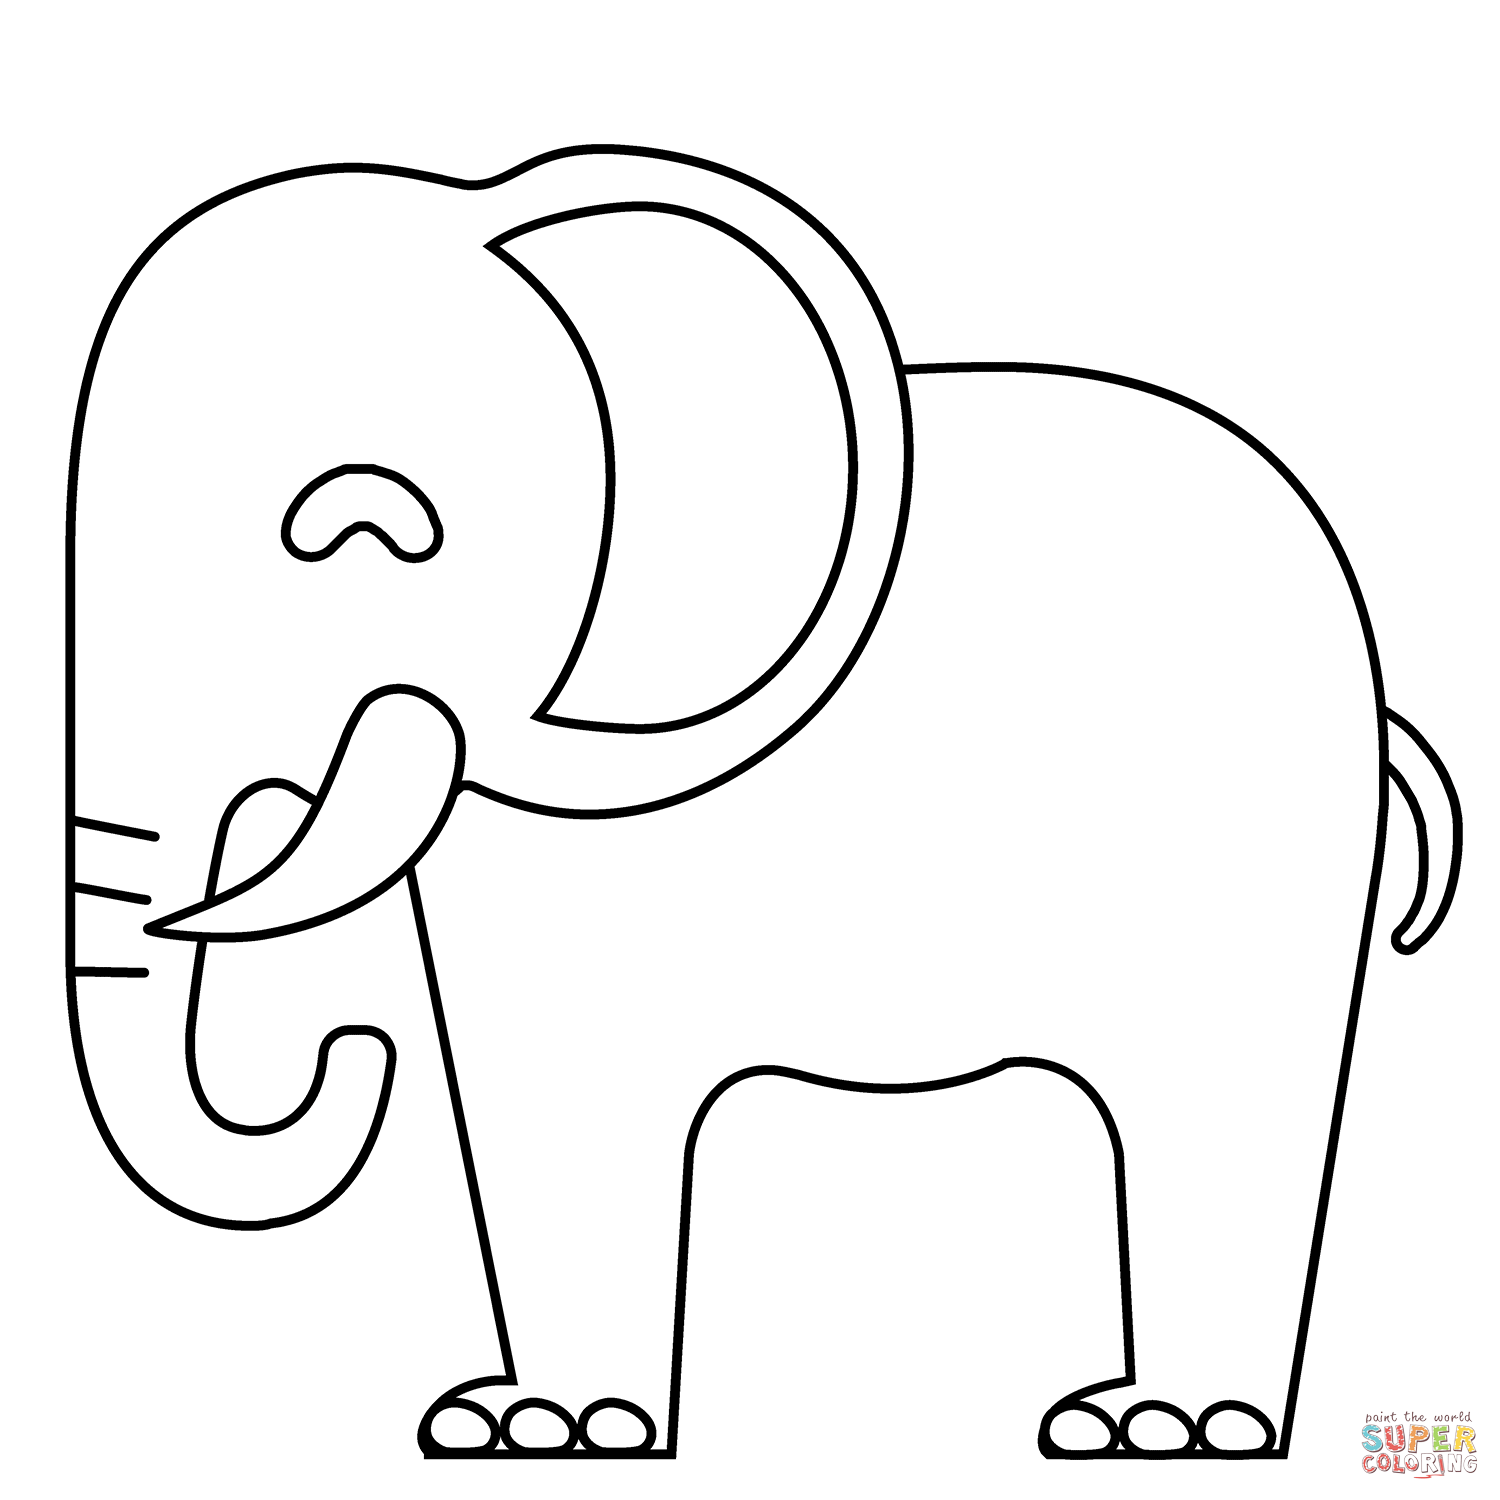 Elephant emoji coloring page free printable coloring pages